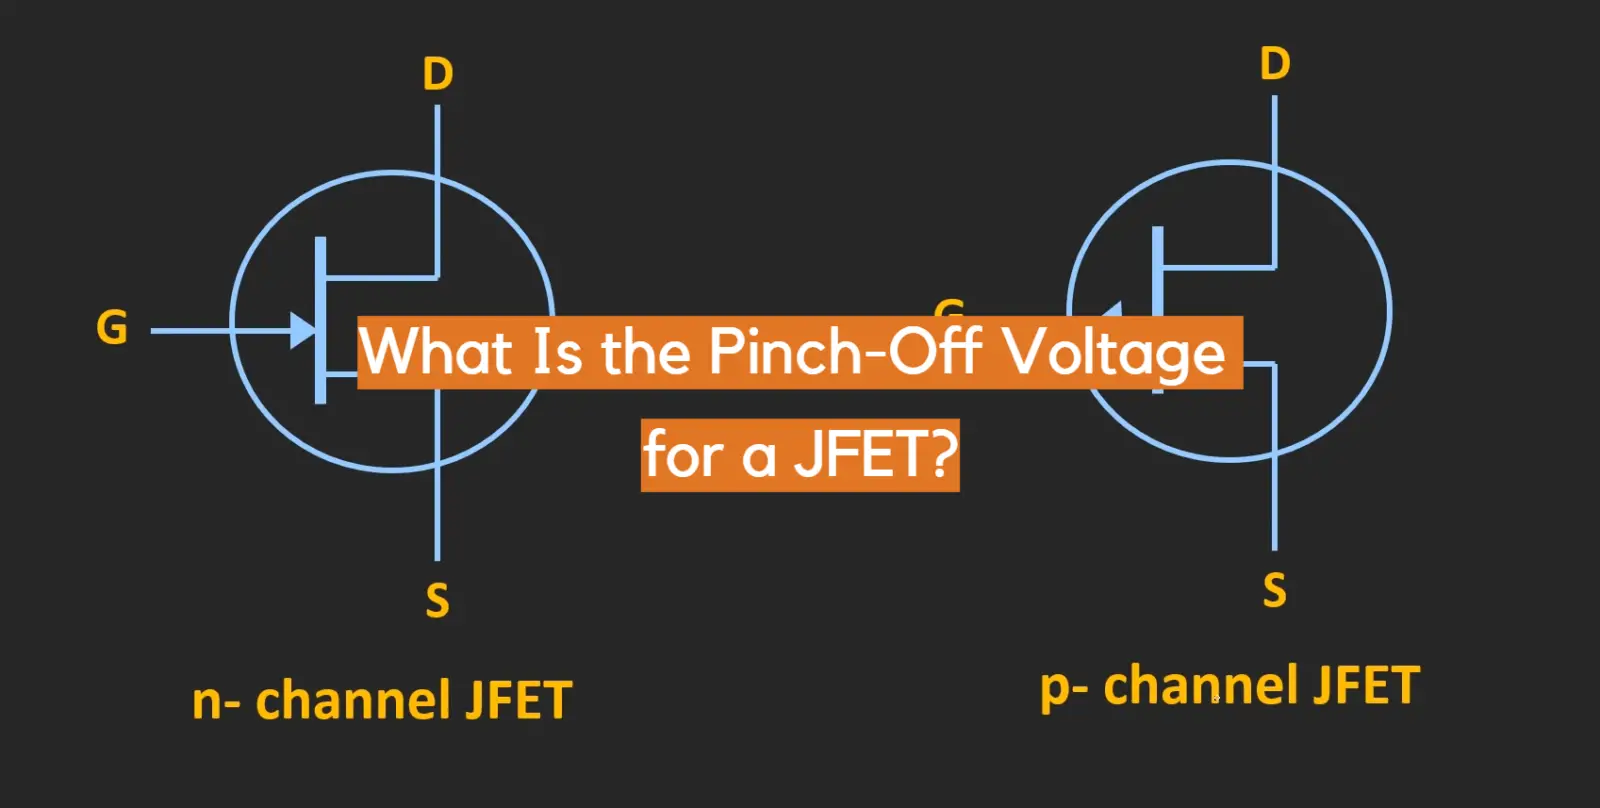 What Is the Pinch-Off Voltage for a JFET?